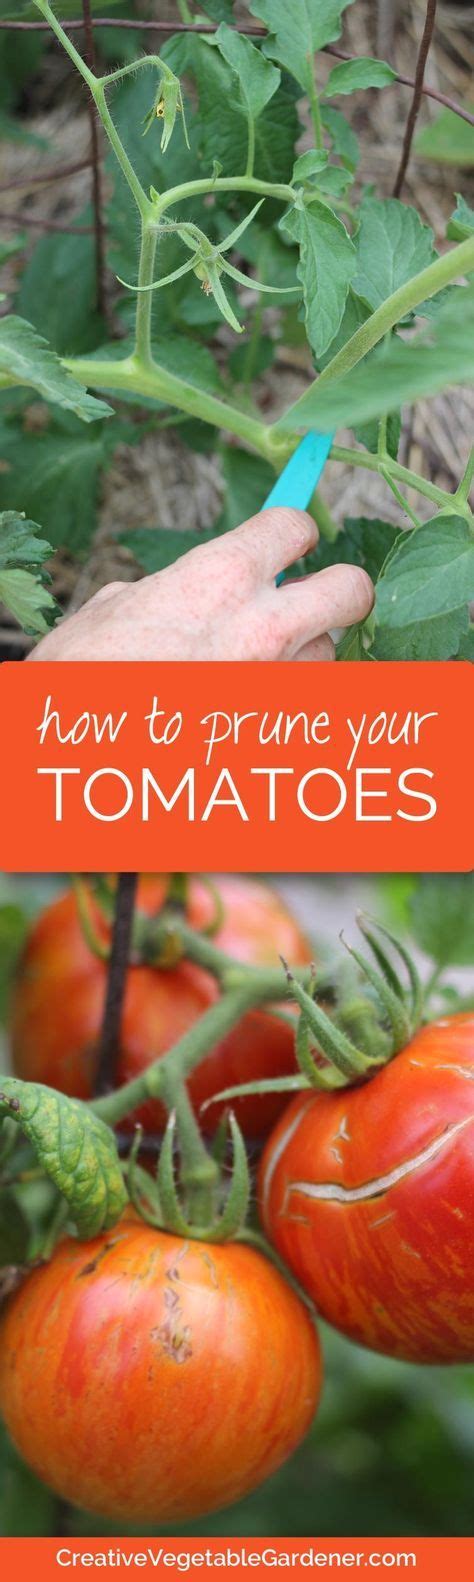 How To Prune Your Tomato Plants — Info You Should Know